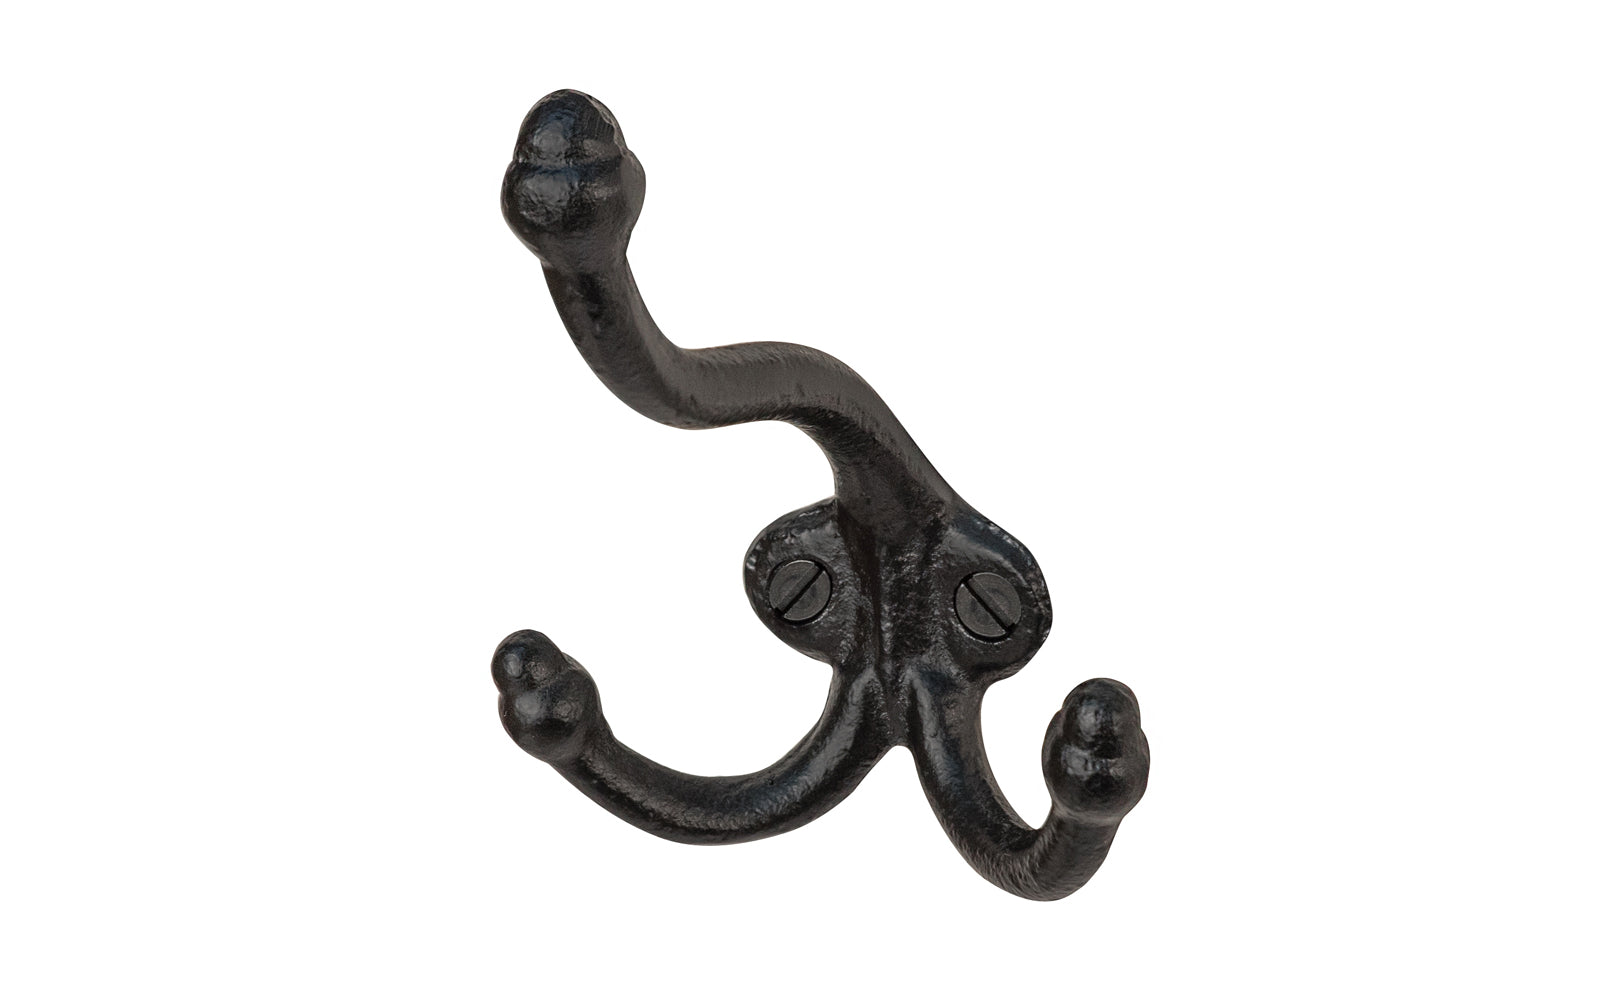 A charming vintage-style triple prong black cast-iron acorn hook. Great for use in hallways, hall trees, coat racks, kitchens, bedrooms, & many other places. The hook is made of strong cast iron material, making it durable for heavy coats, bags, & clothing. Three prongs on the hook with acorn tips.